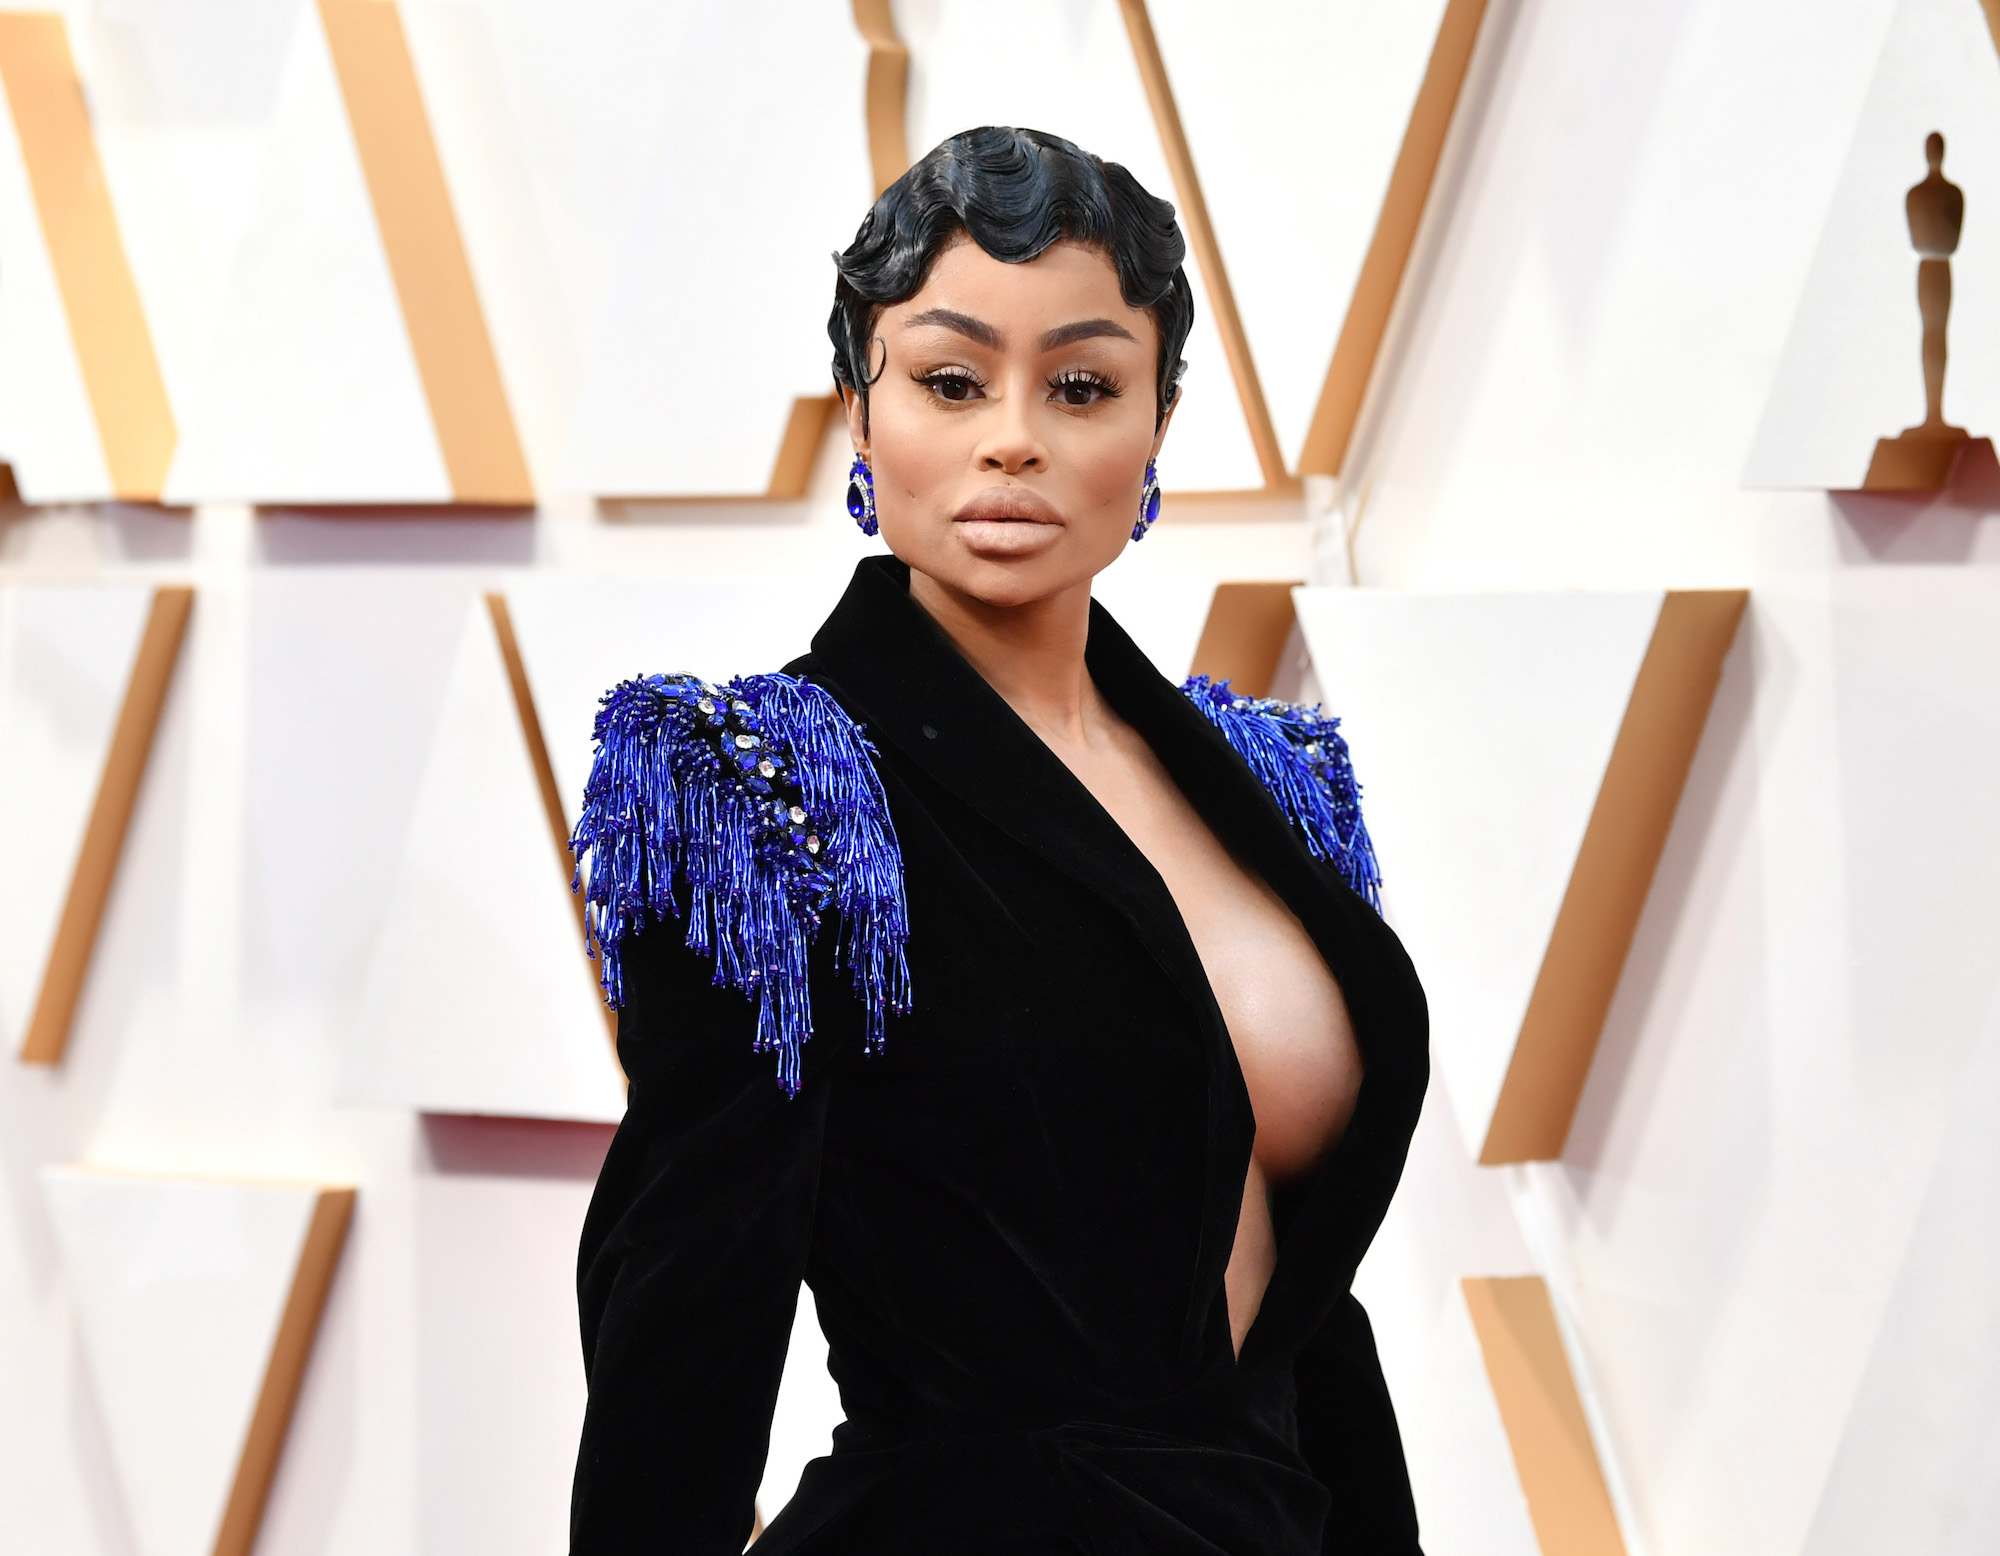 Blac Chyna Shades Kris Jenner Following Kanye West’s Tweets